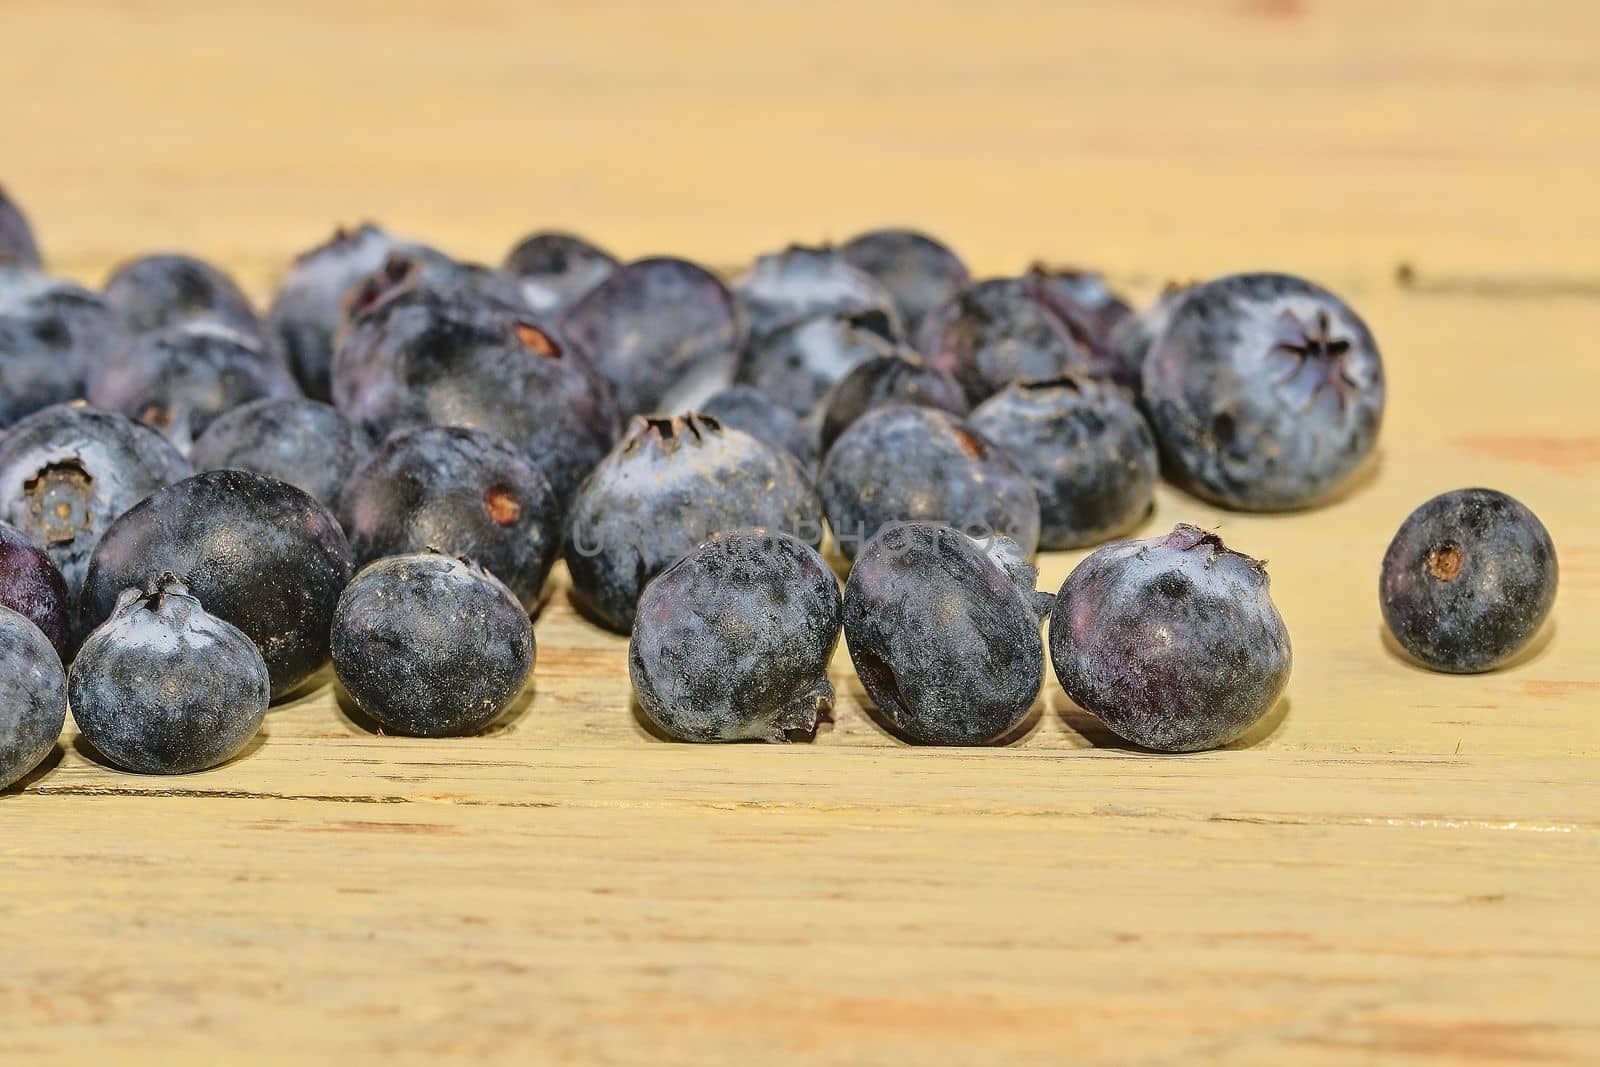 Blueberries  on white wooden background. Bilberries, blueberries, huckleberries whortleberries